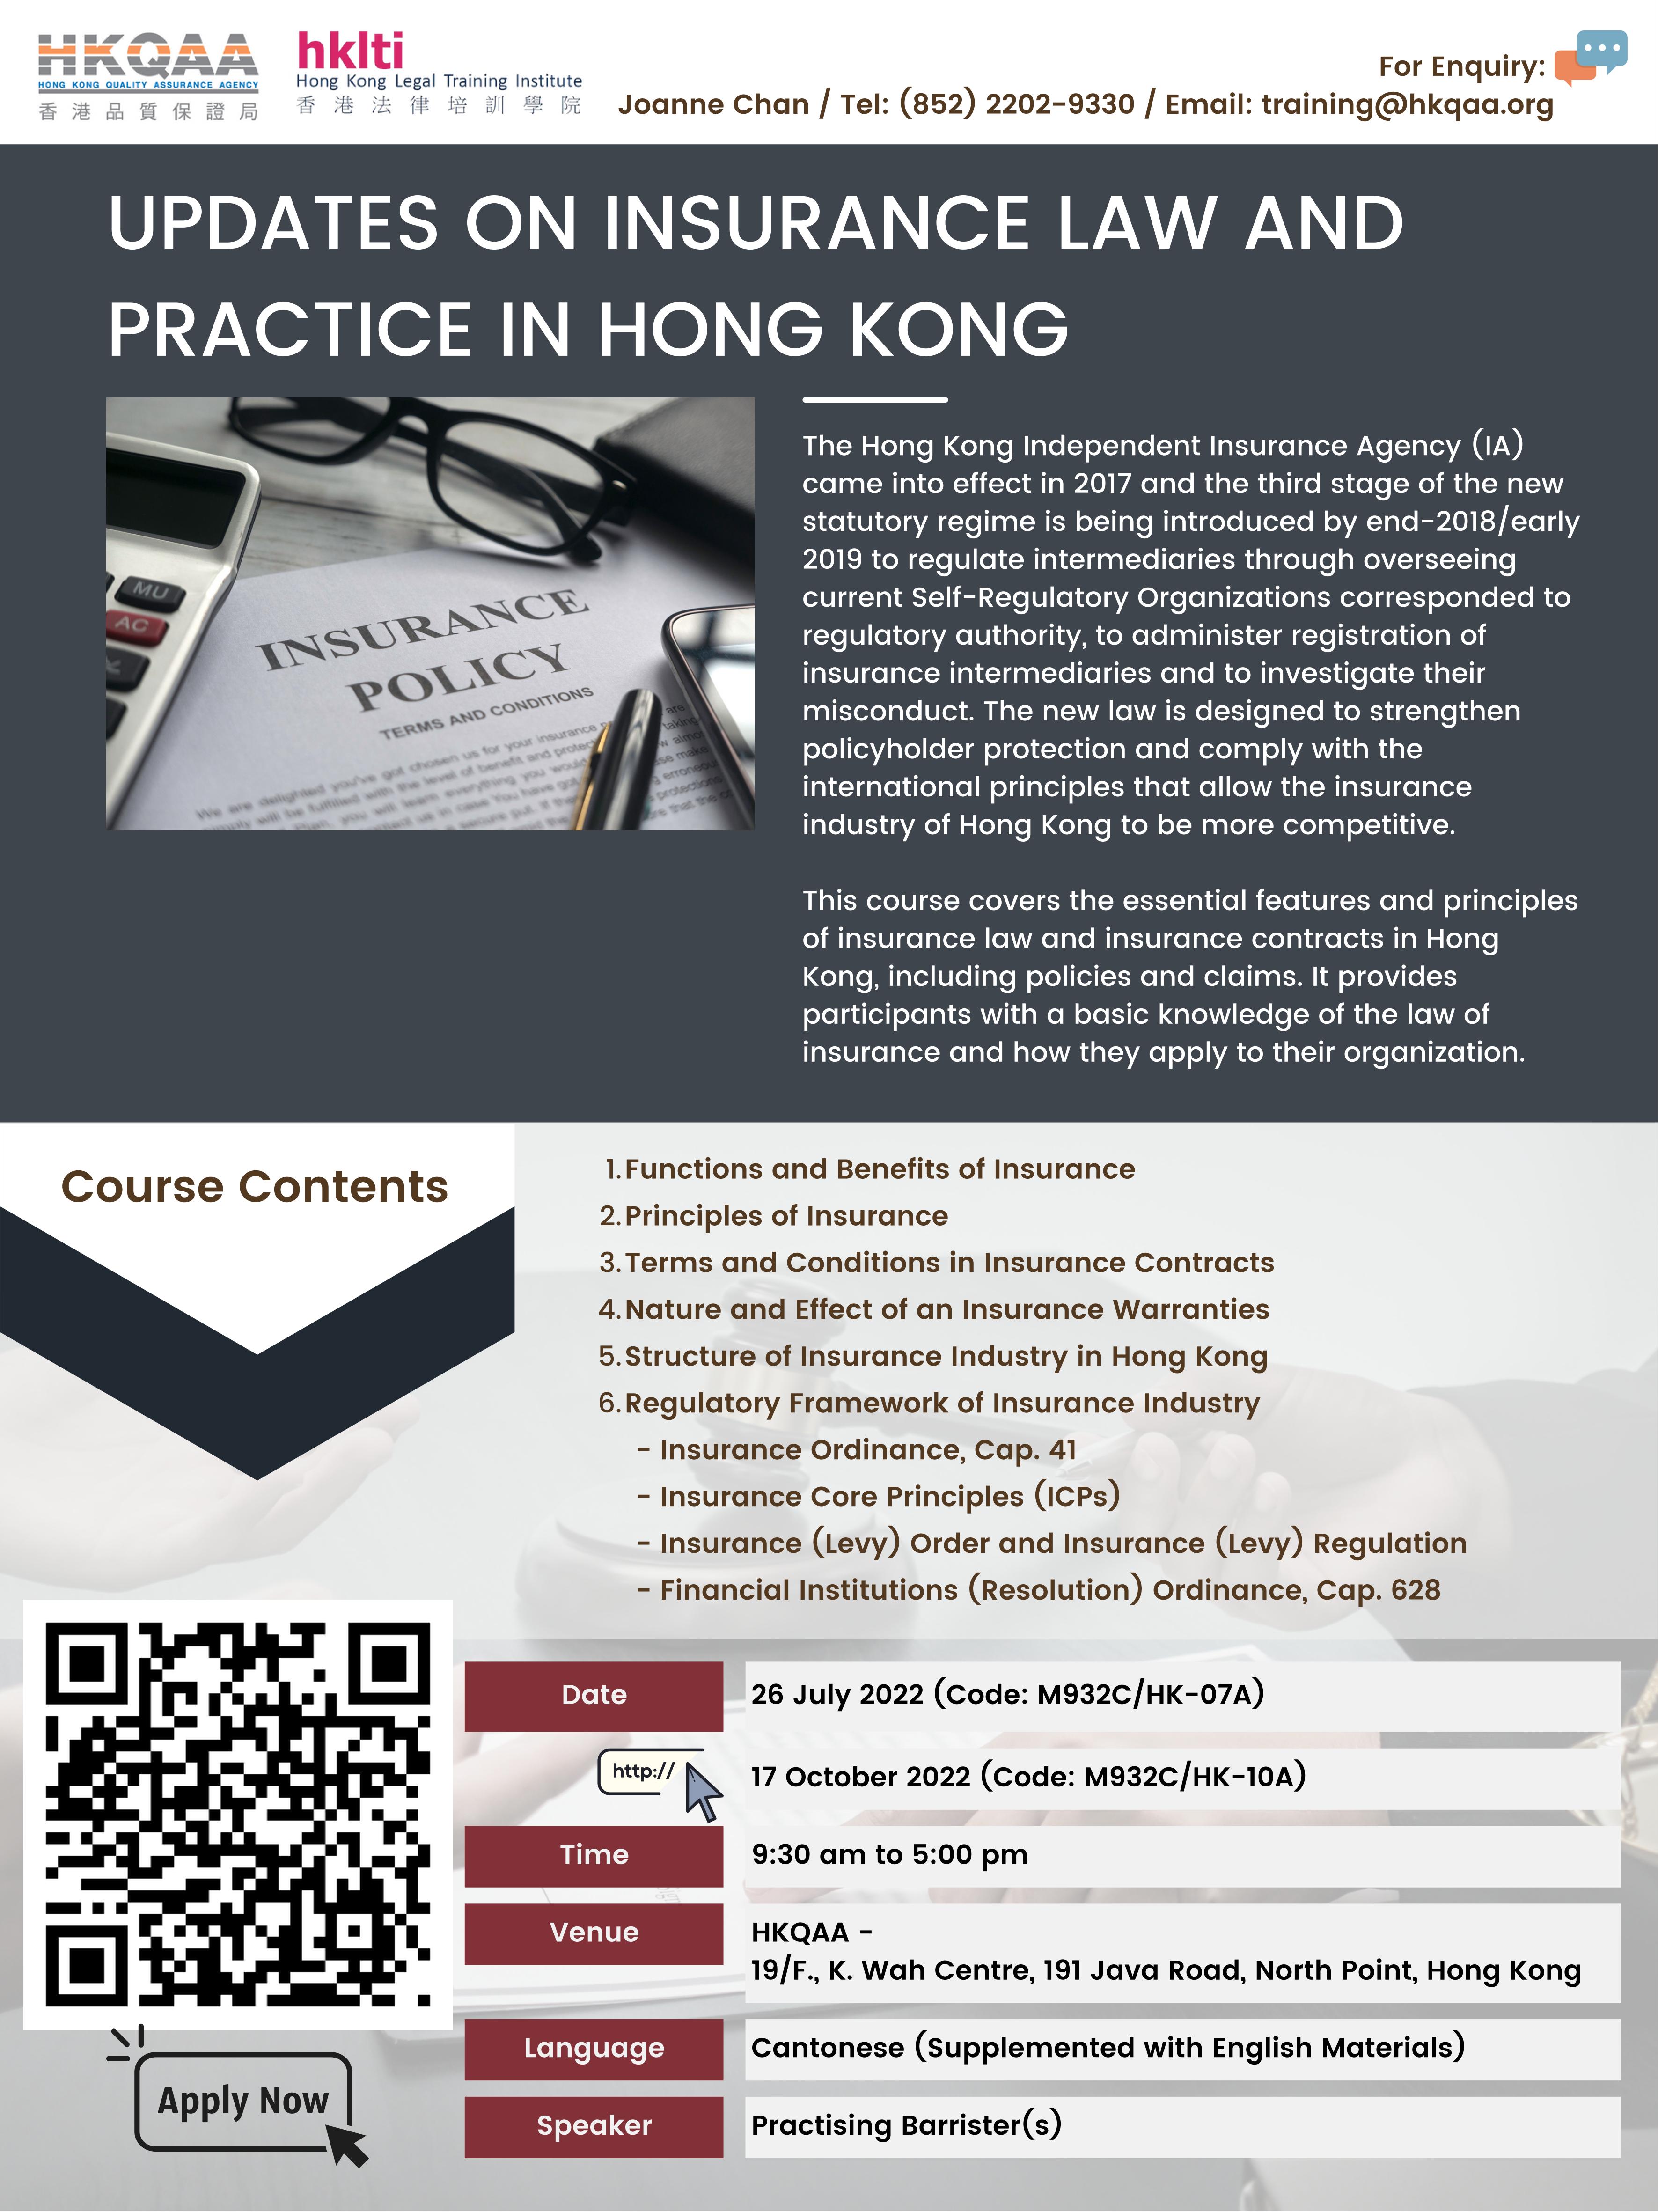 Updated on Insurance and Practice in Hong Kong